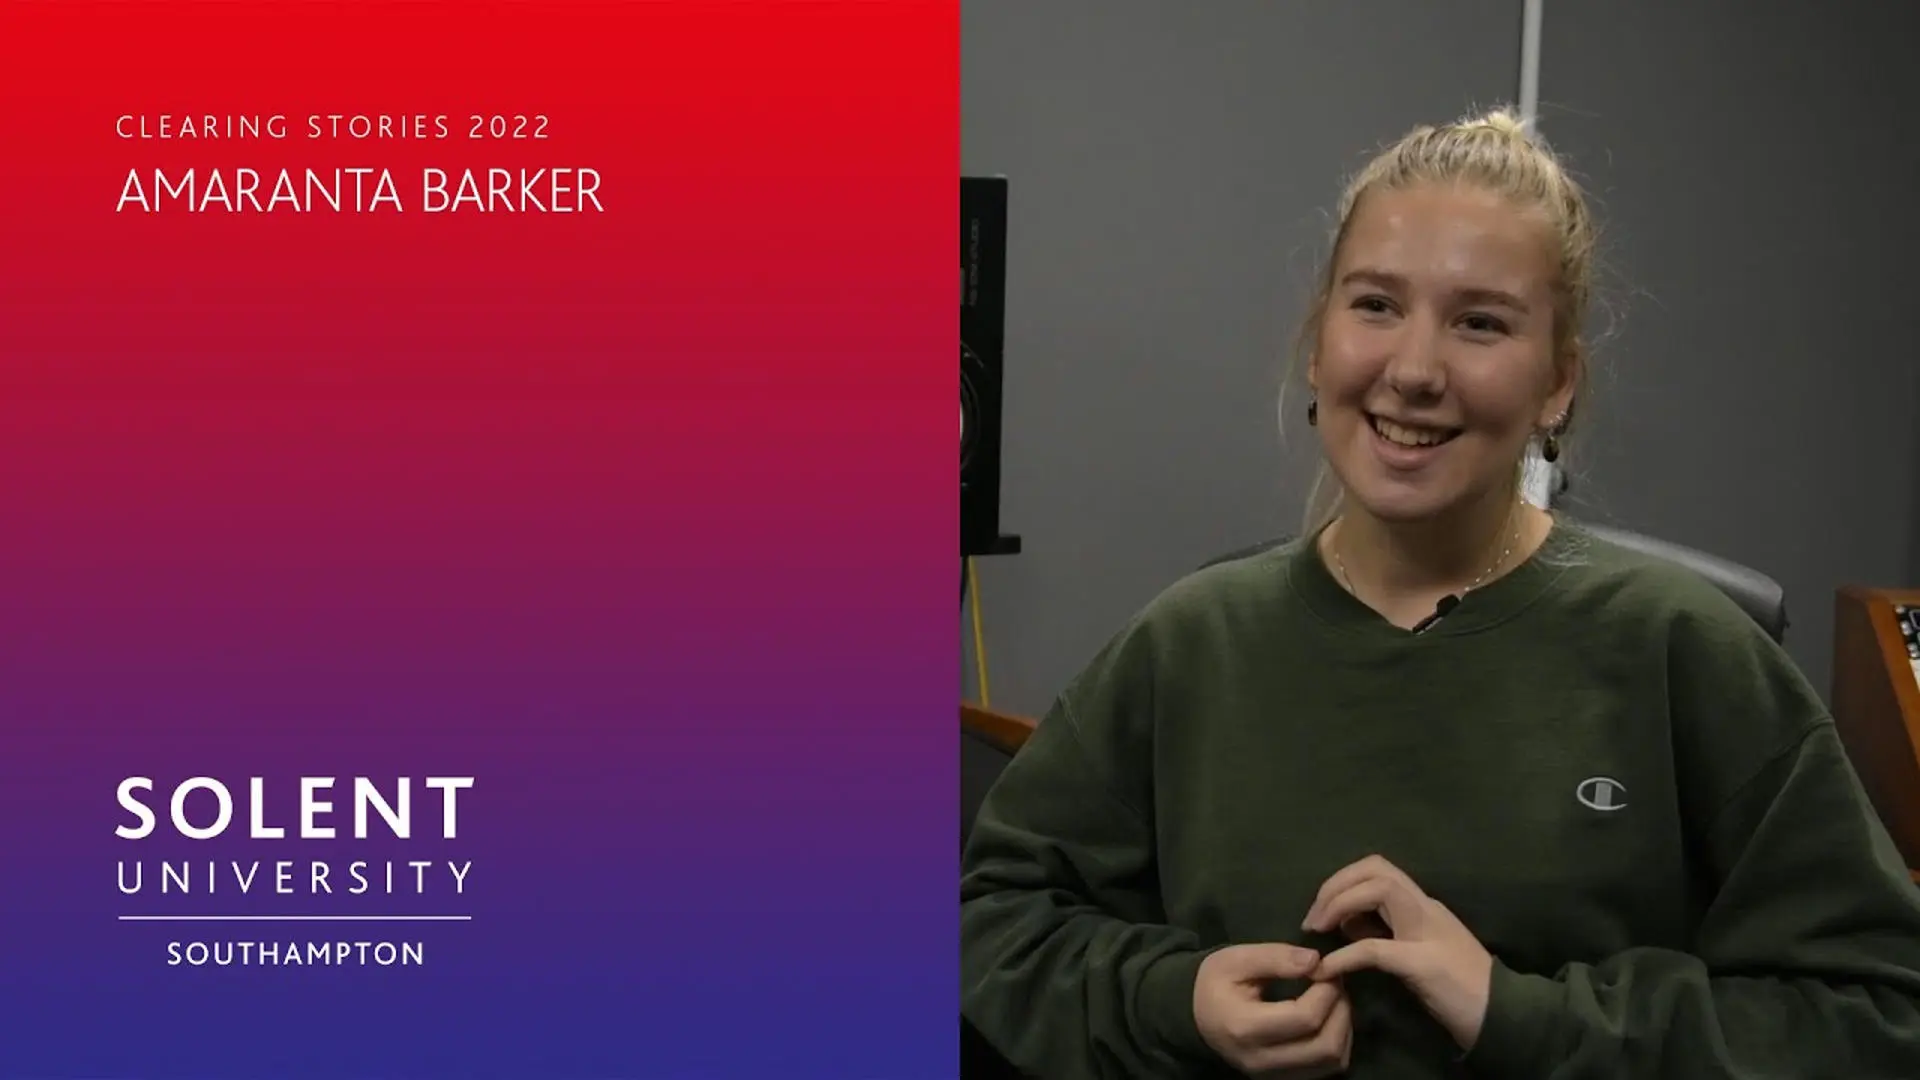 On the left of the screen is a red to purple gradient (portrait) with white copy over the top which reads 'Clearing stories 2022 - Amaranta Barker' with the Solent University, Southampton logo bottom left. To the right is a photo of Amaranta, who is looking off camera and smiling.